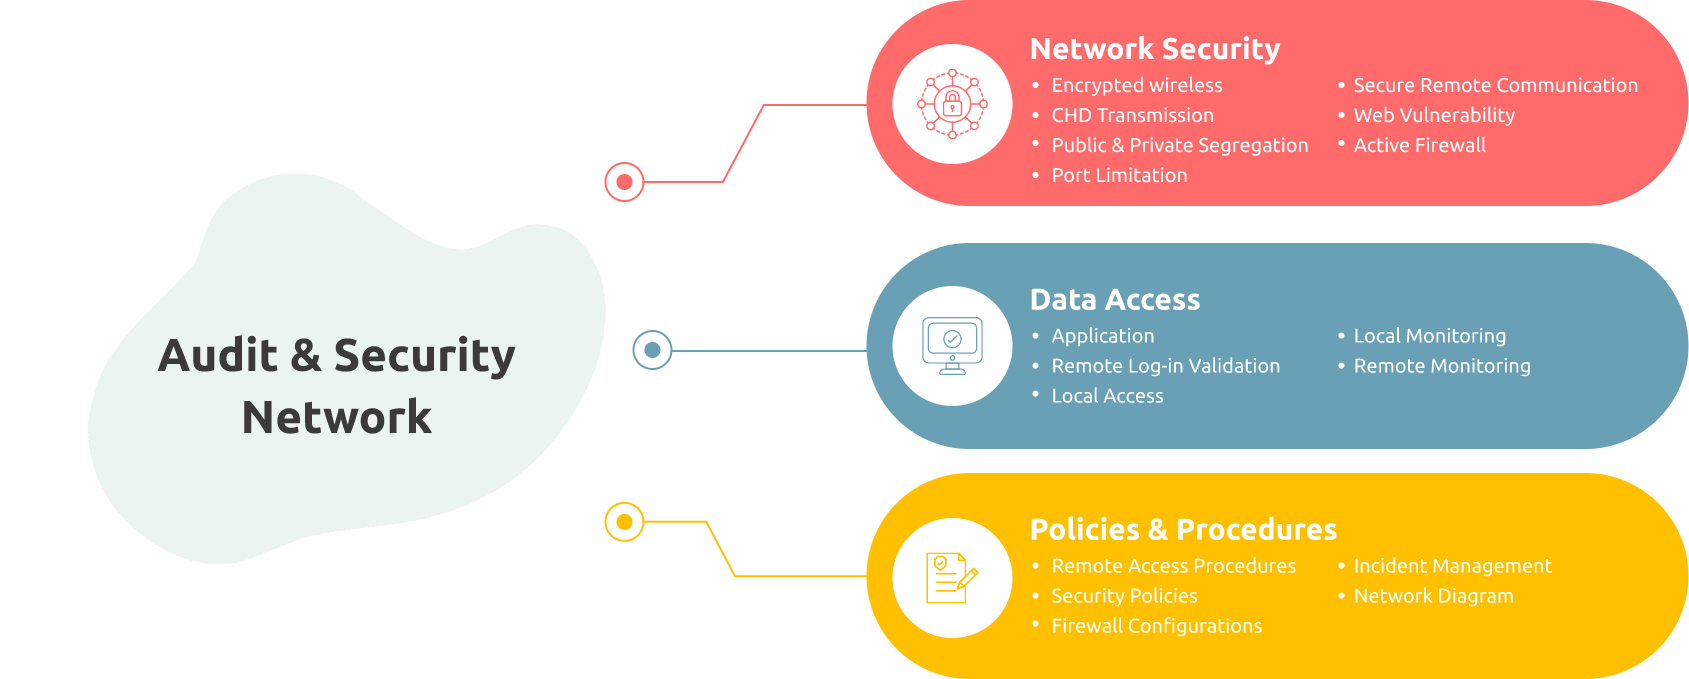 Audit and Security Network illustrated: Protecting technology systems and data through comprehensive monitoring and analysis.